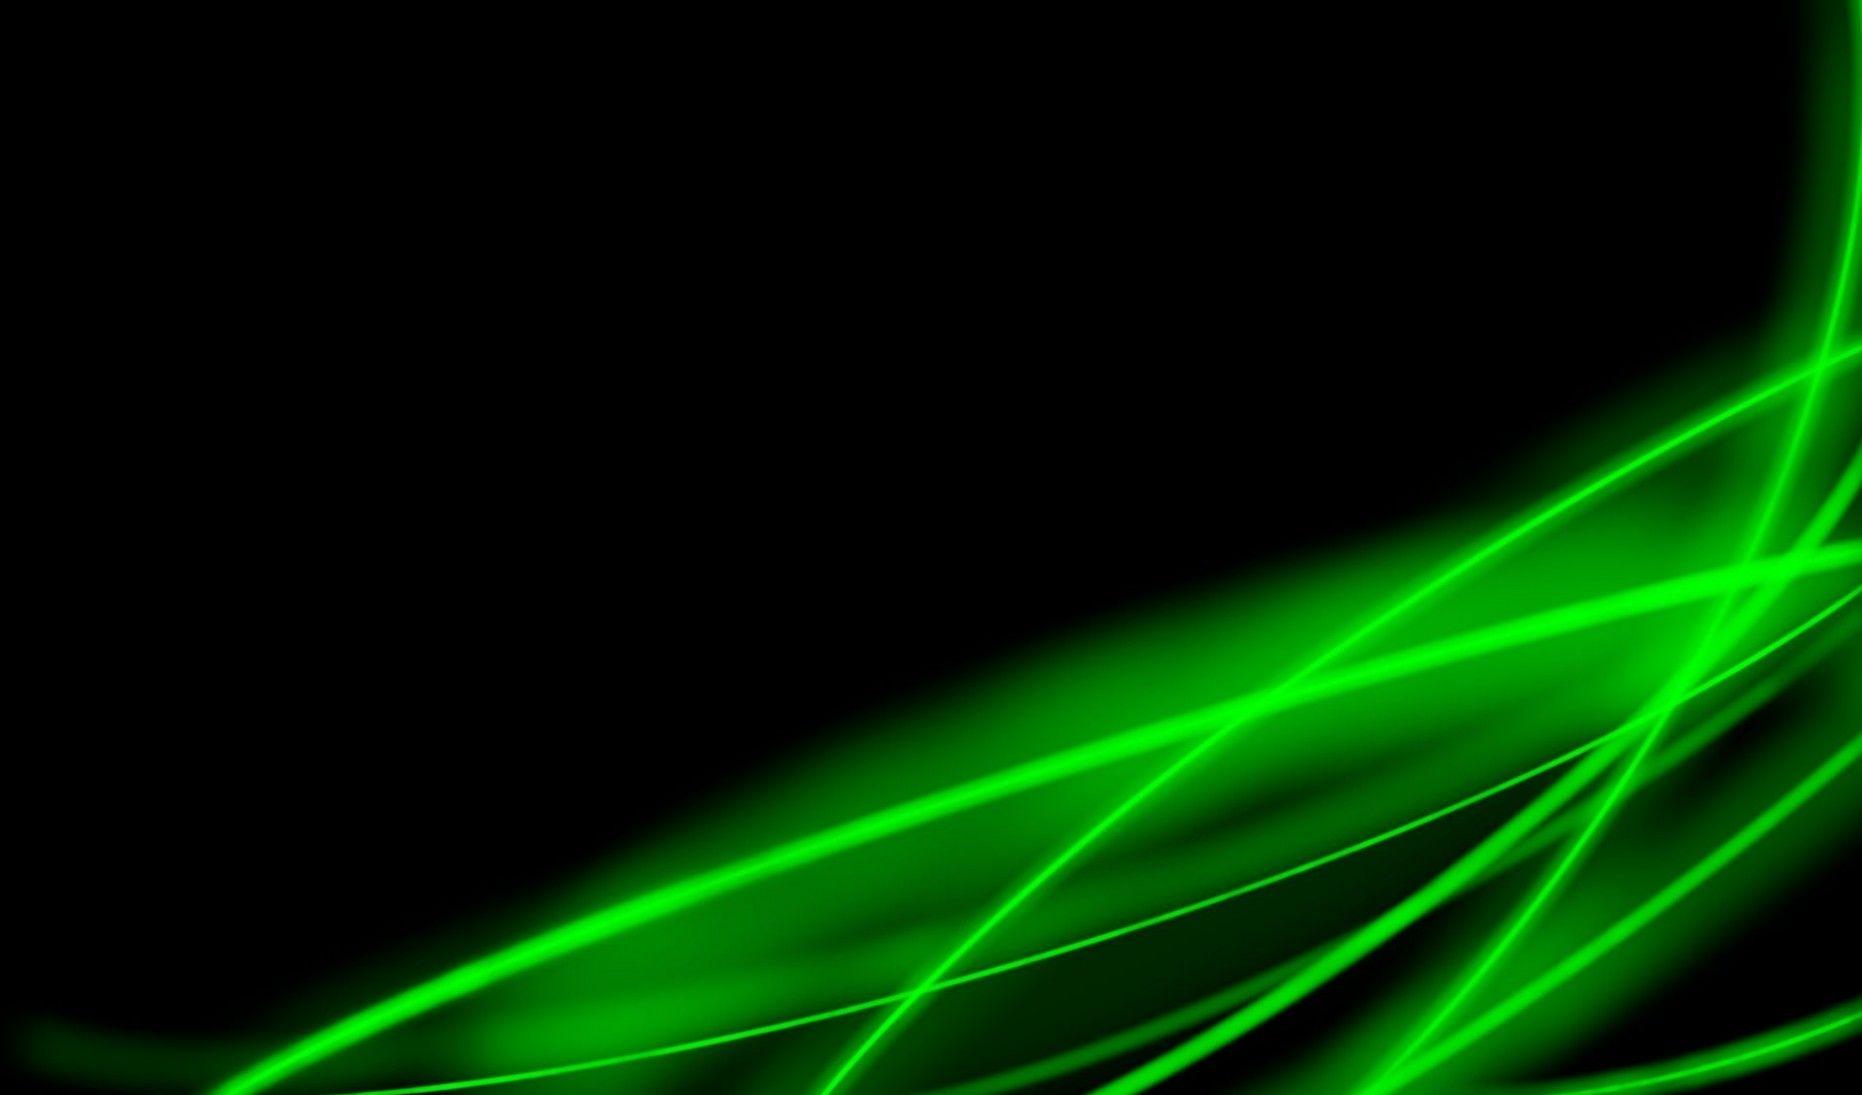 New Thoughts About Neon Green Wallpaper That Will Turn Your